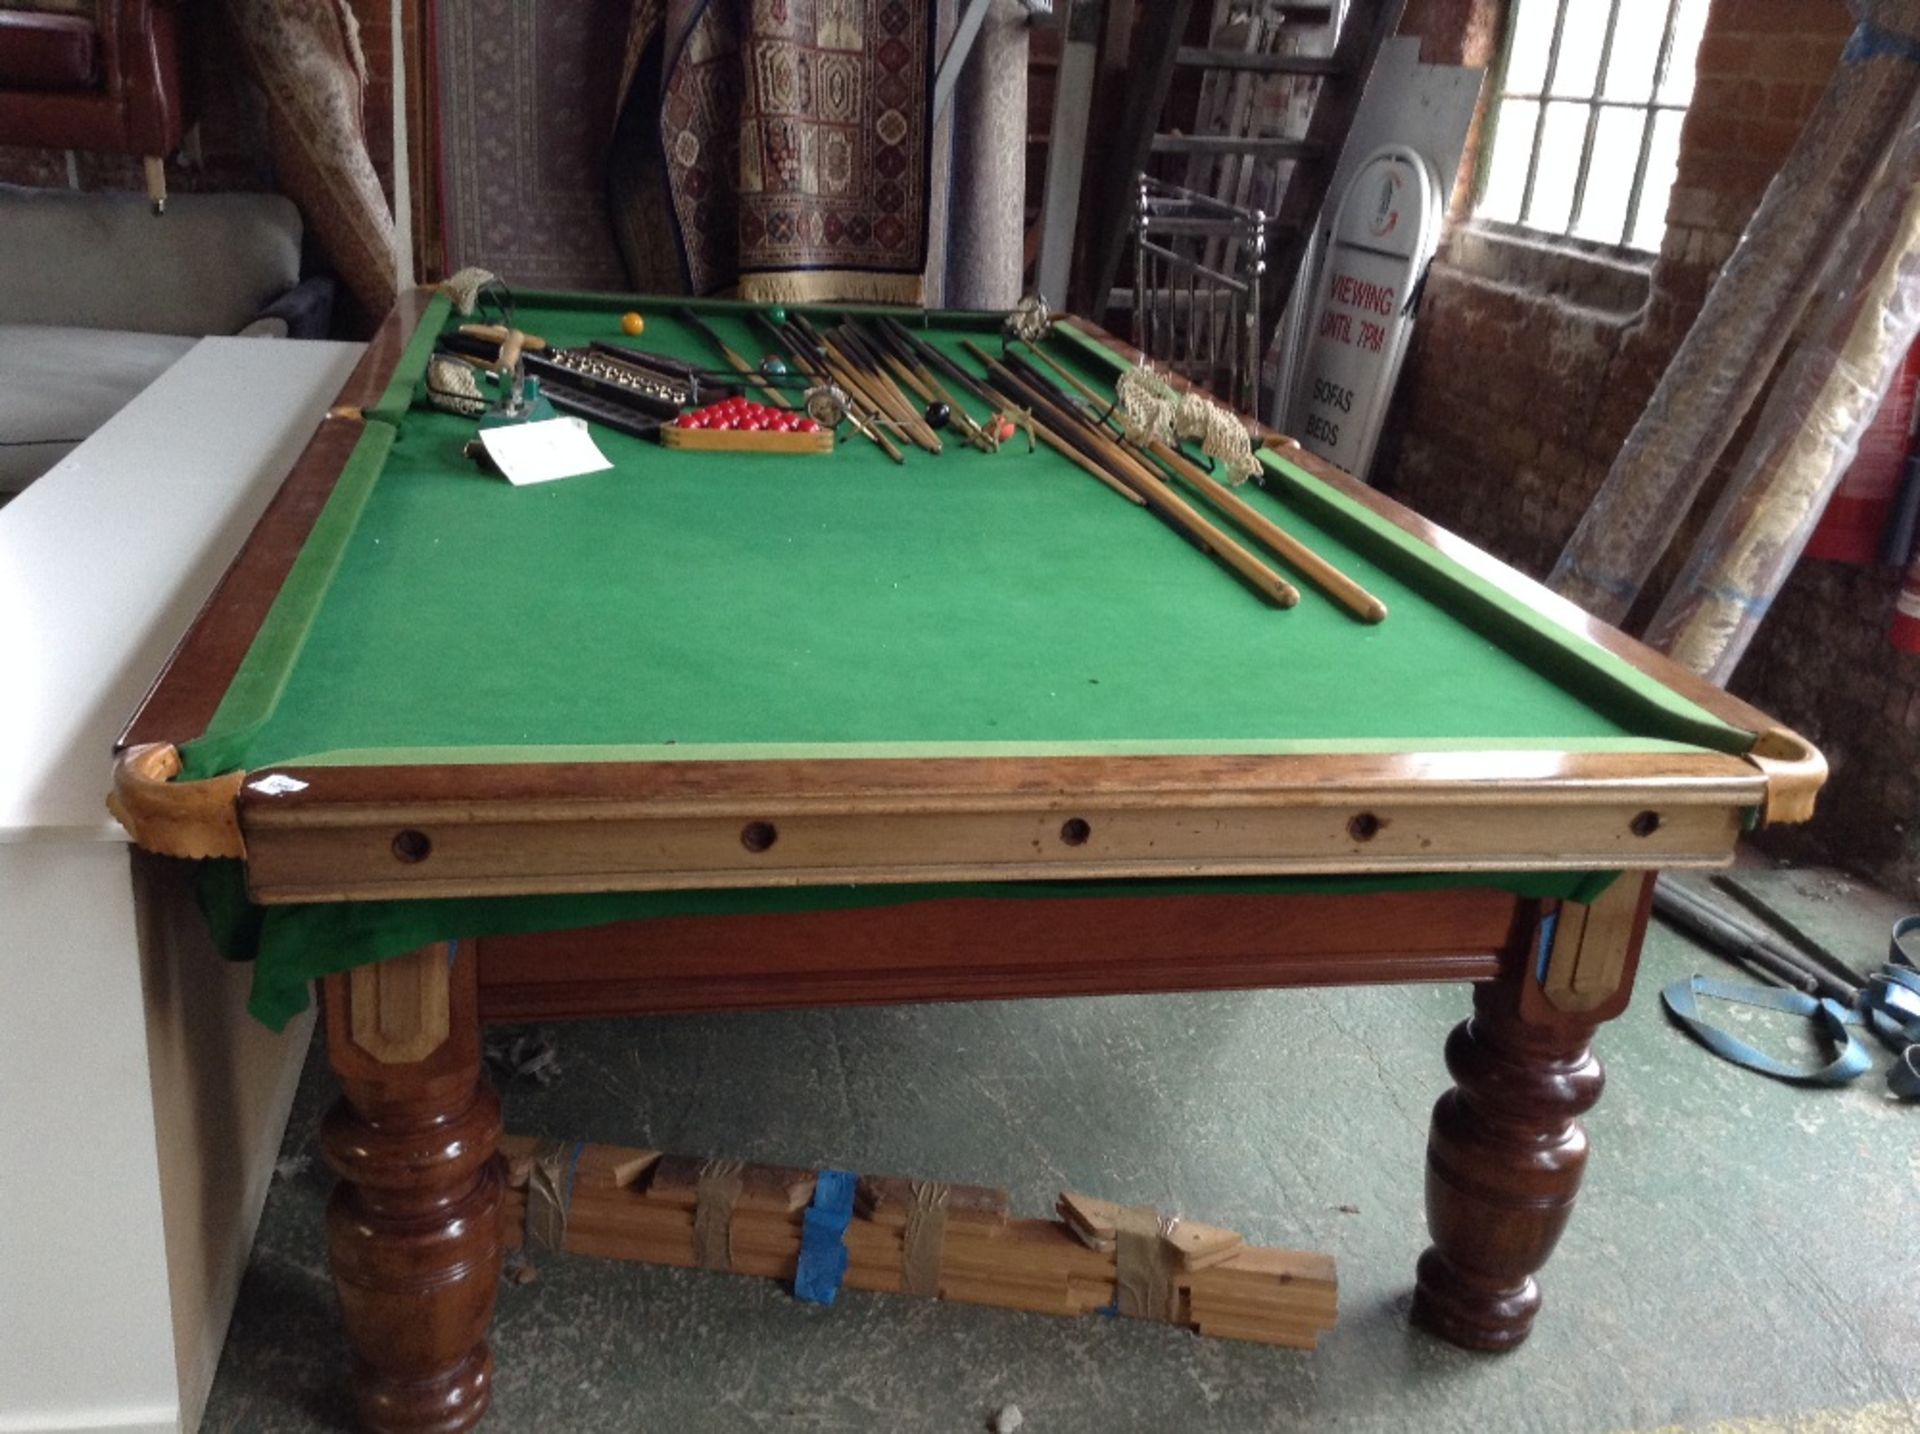 SNOOKER TABLE - 7/8TH FULL SIZE (collection only,